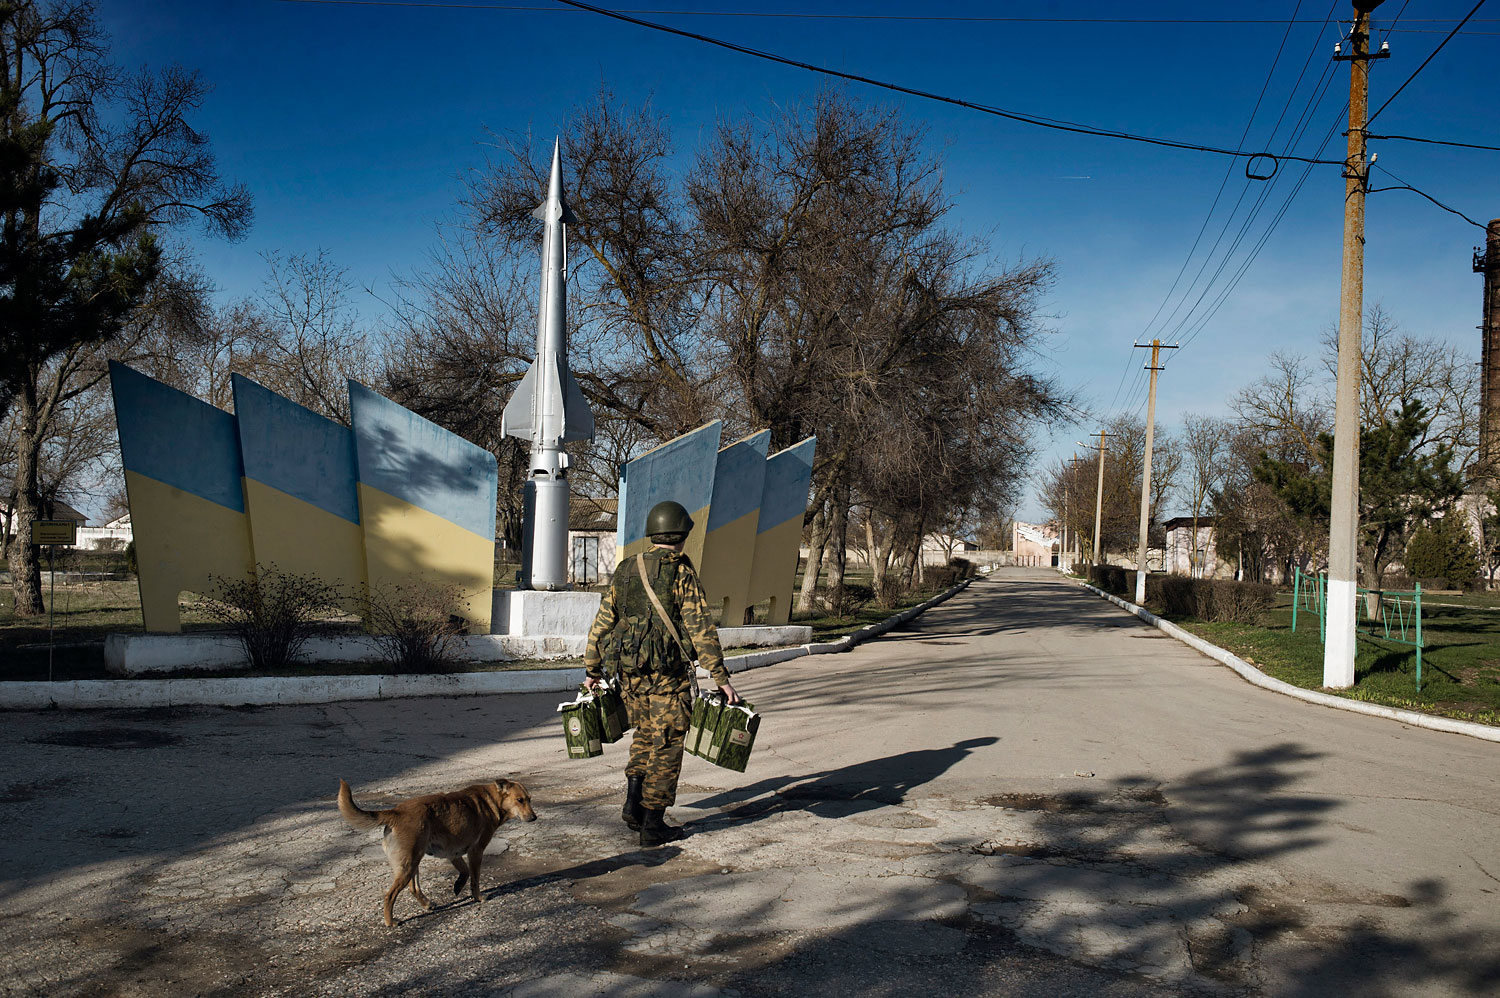 Russian troops occupy a Ukrainian military base in the Crimean town of Yevpatori, March 5, 2014.